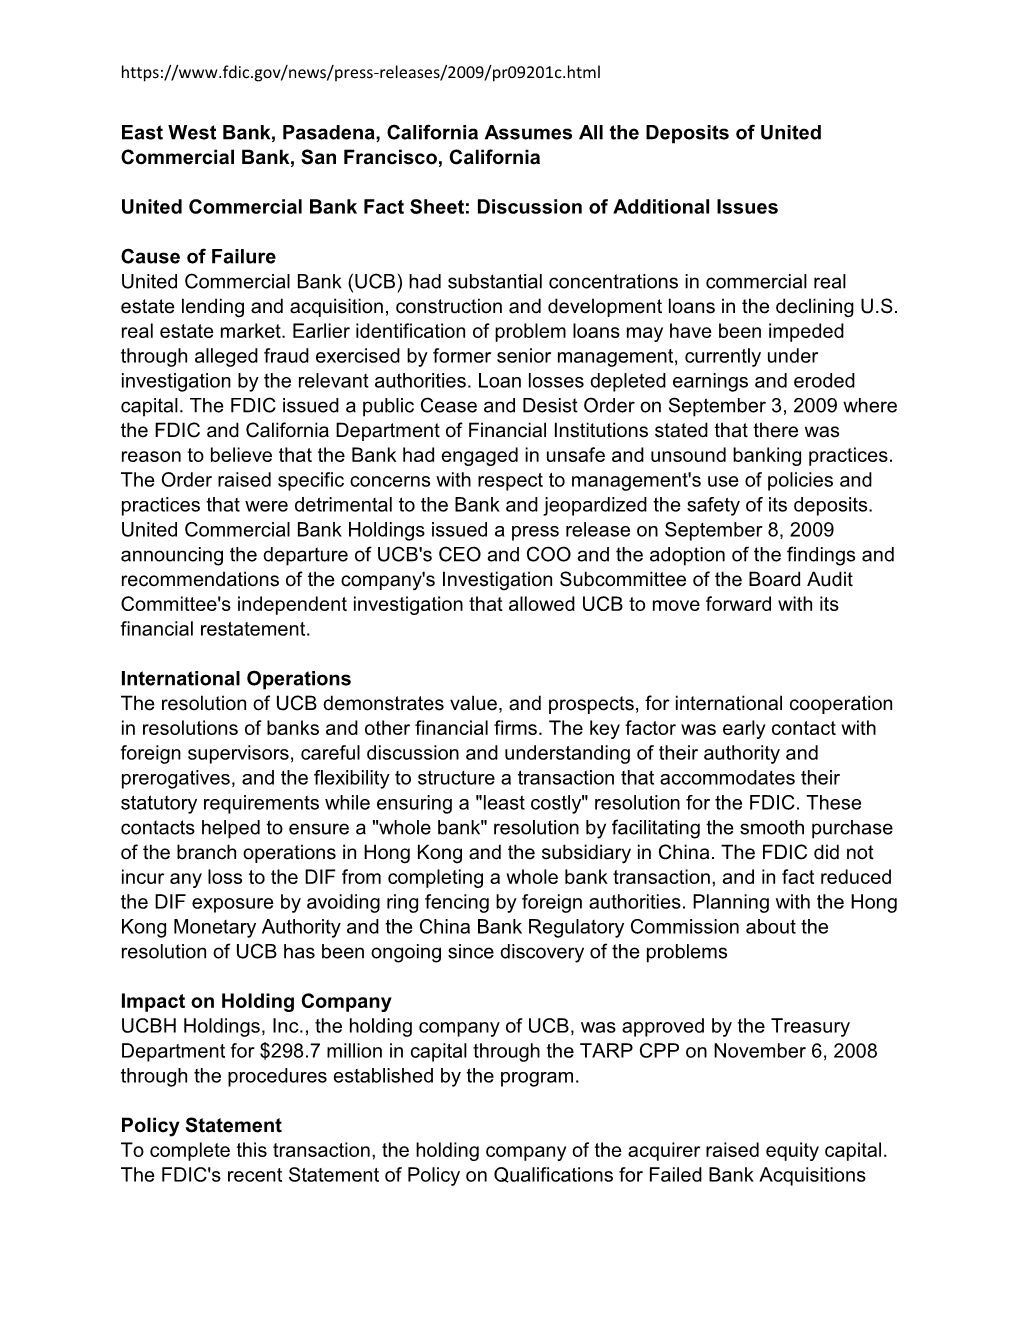 United Commercial Bank Fact Sheet: Discussion of Additional Issues